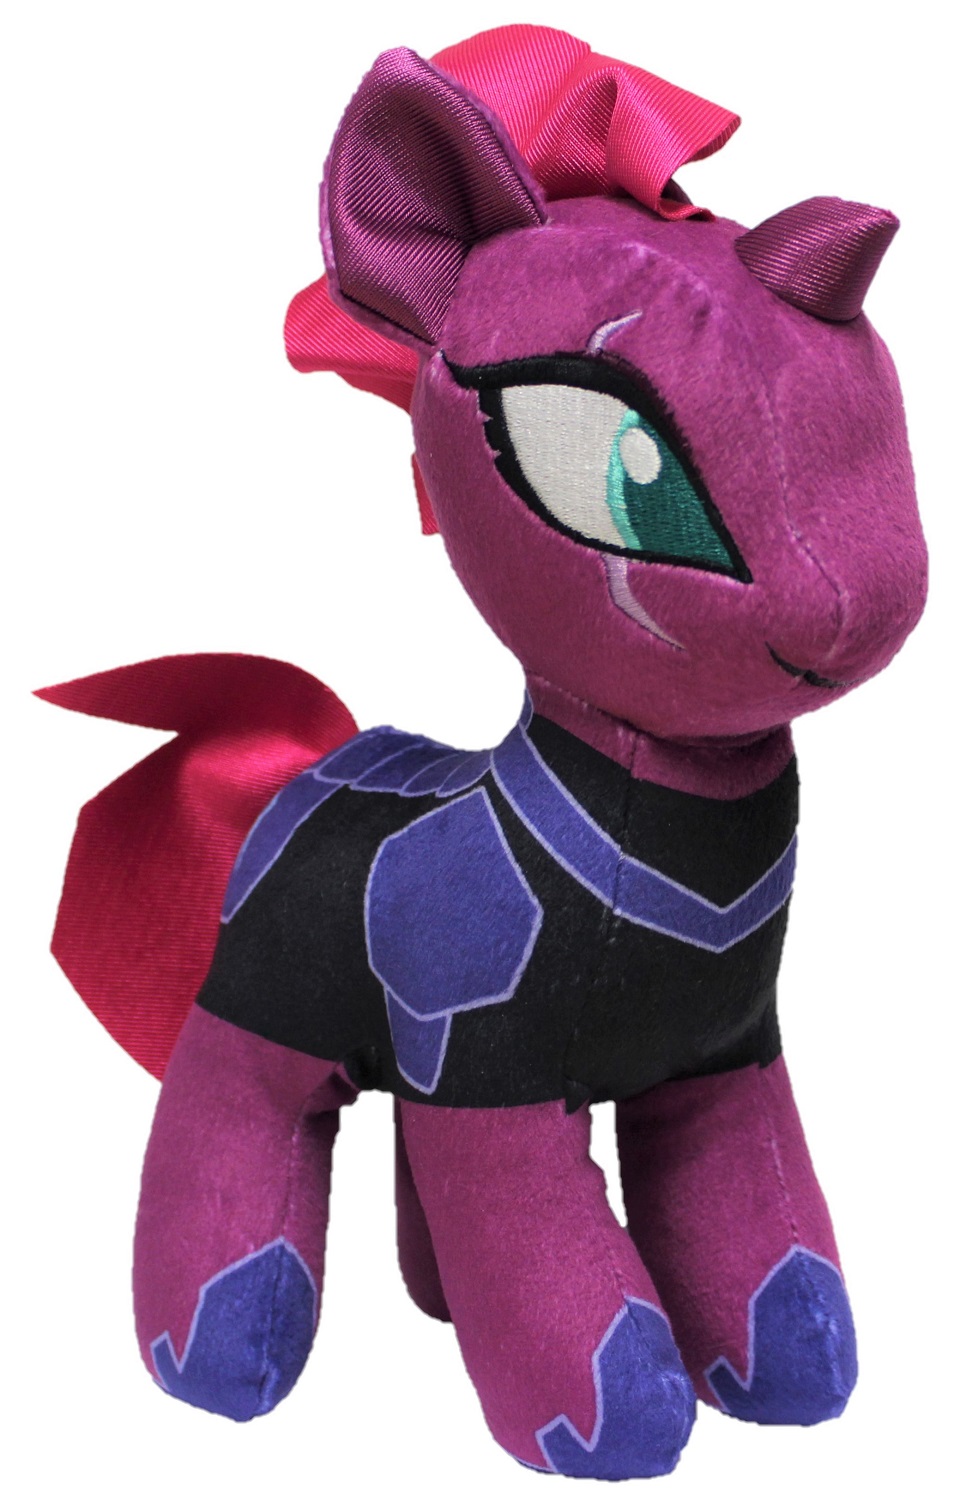 Hasbro My Little Pony Plush Toy Tempest Shadow 9 8 To Play Collect Purple 5010993421534 Ebay Coloring is good exercise for both children and adults. hasbro